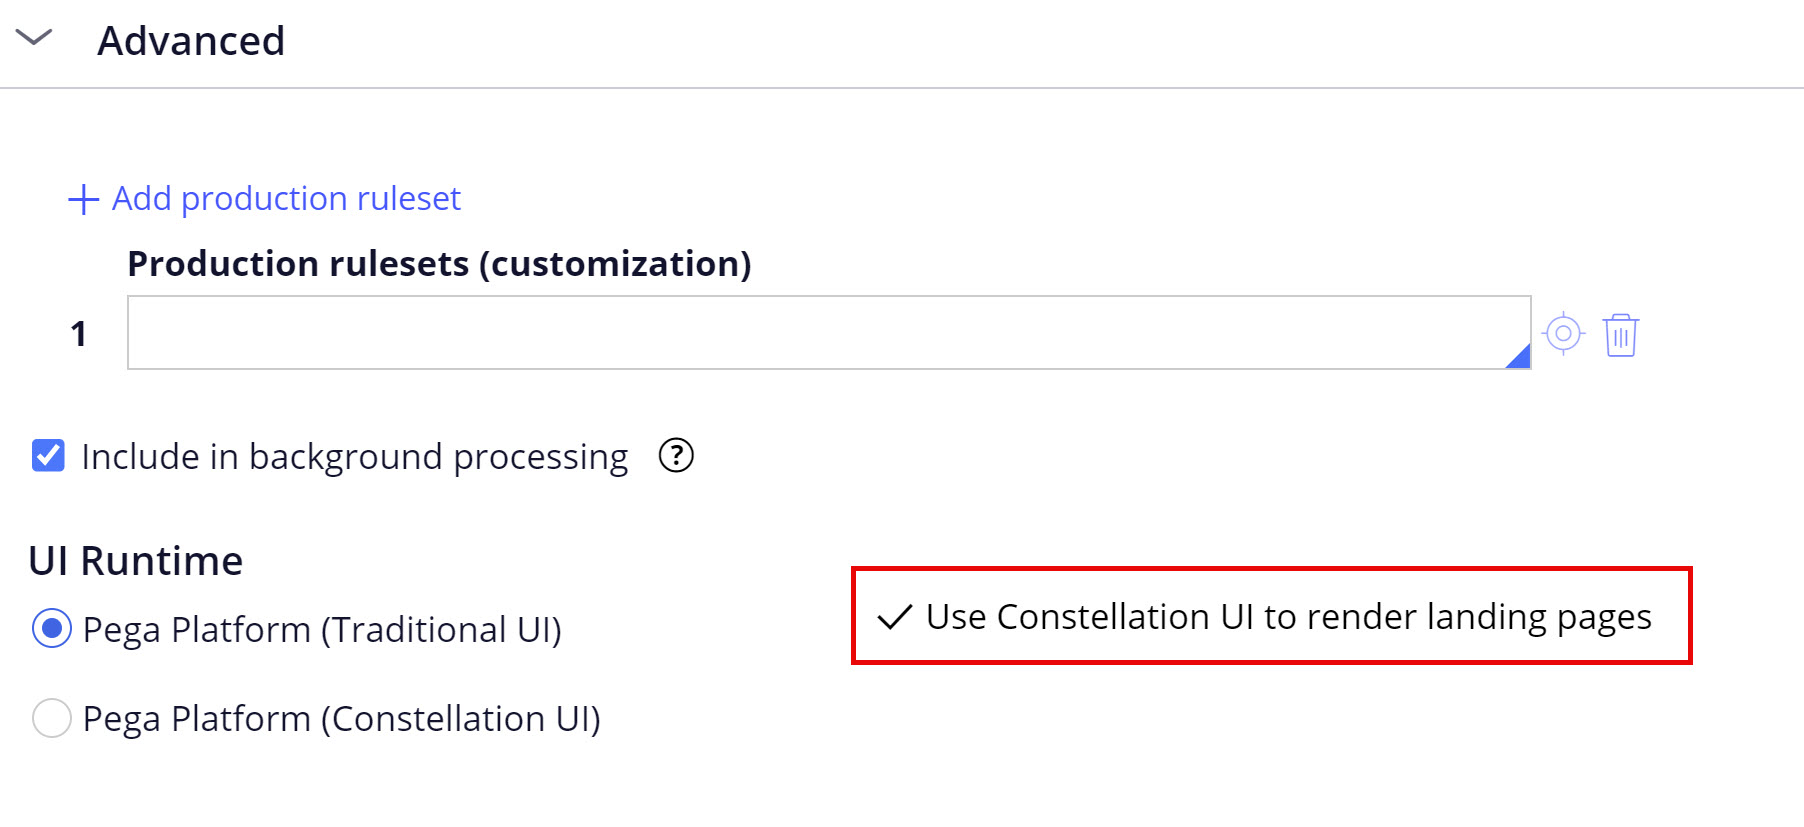 Use constellation UI to render landing pages